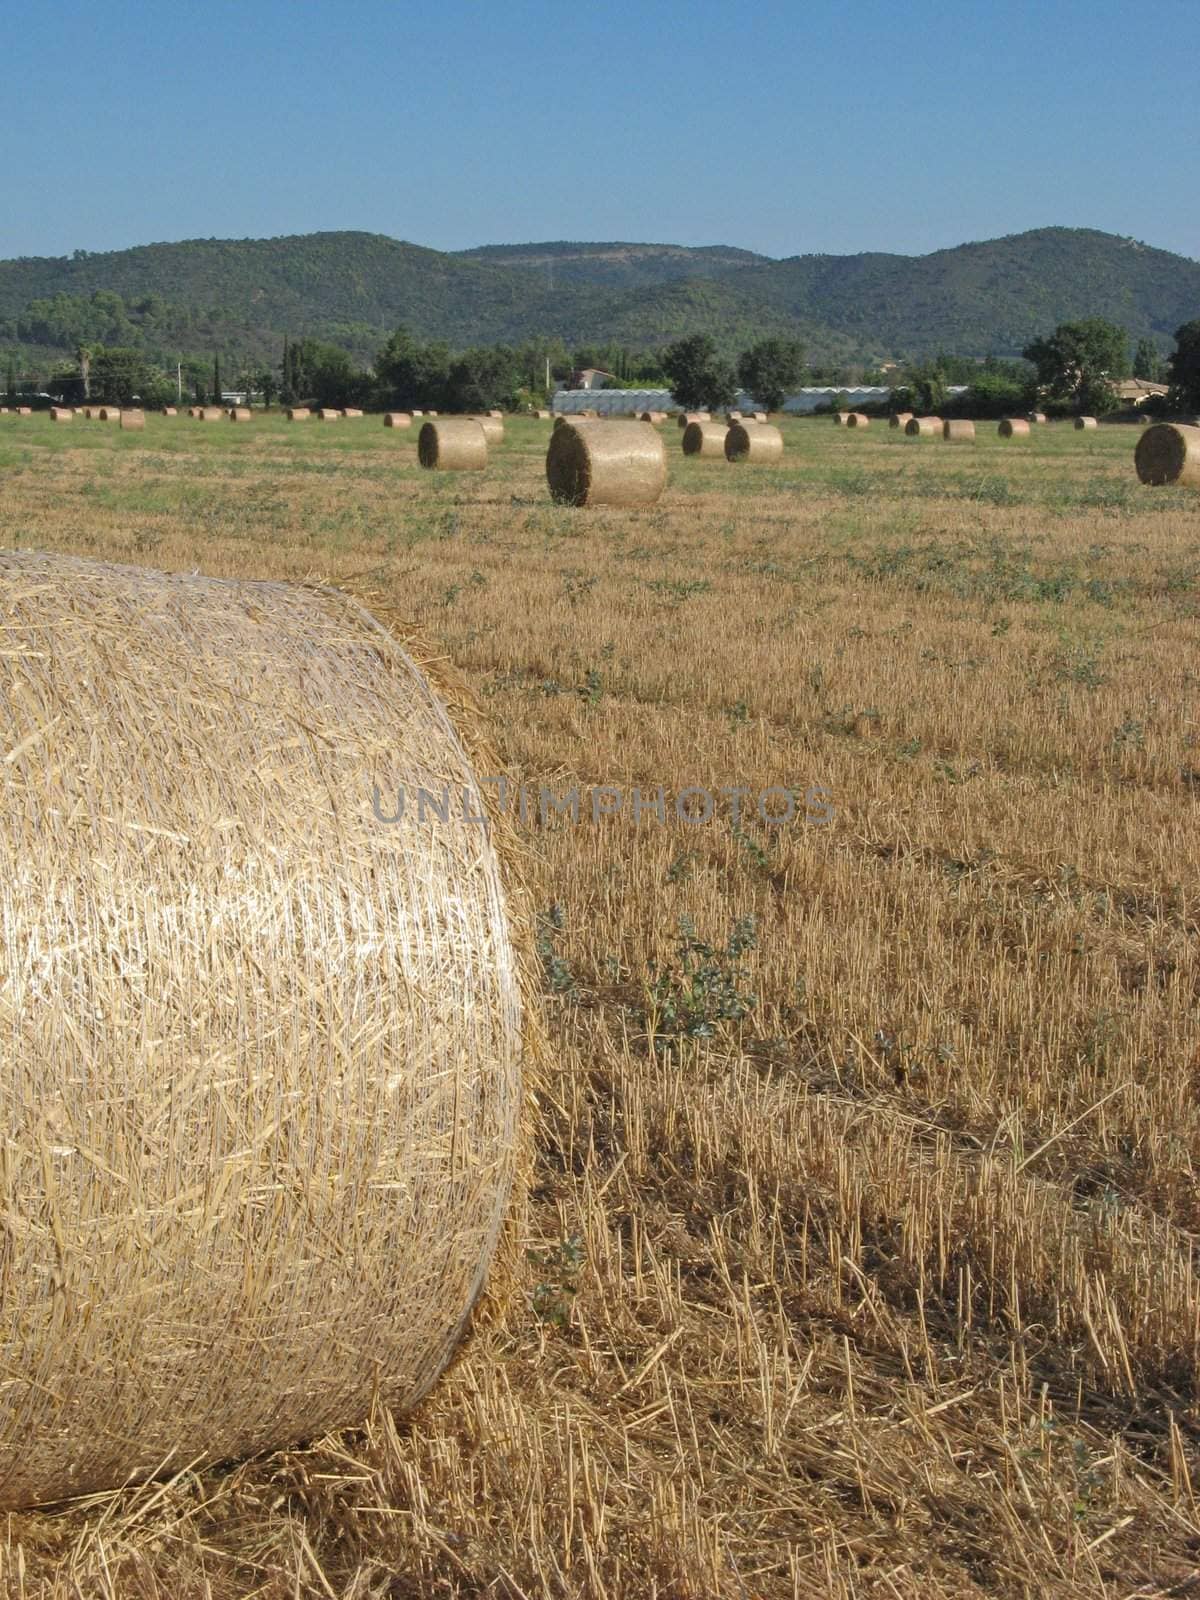 View of some hayrolls in a field